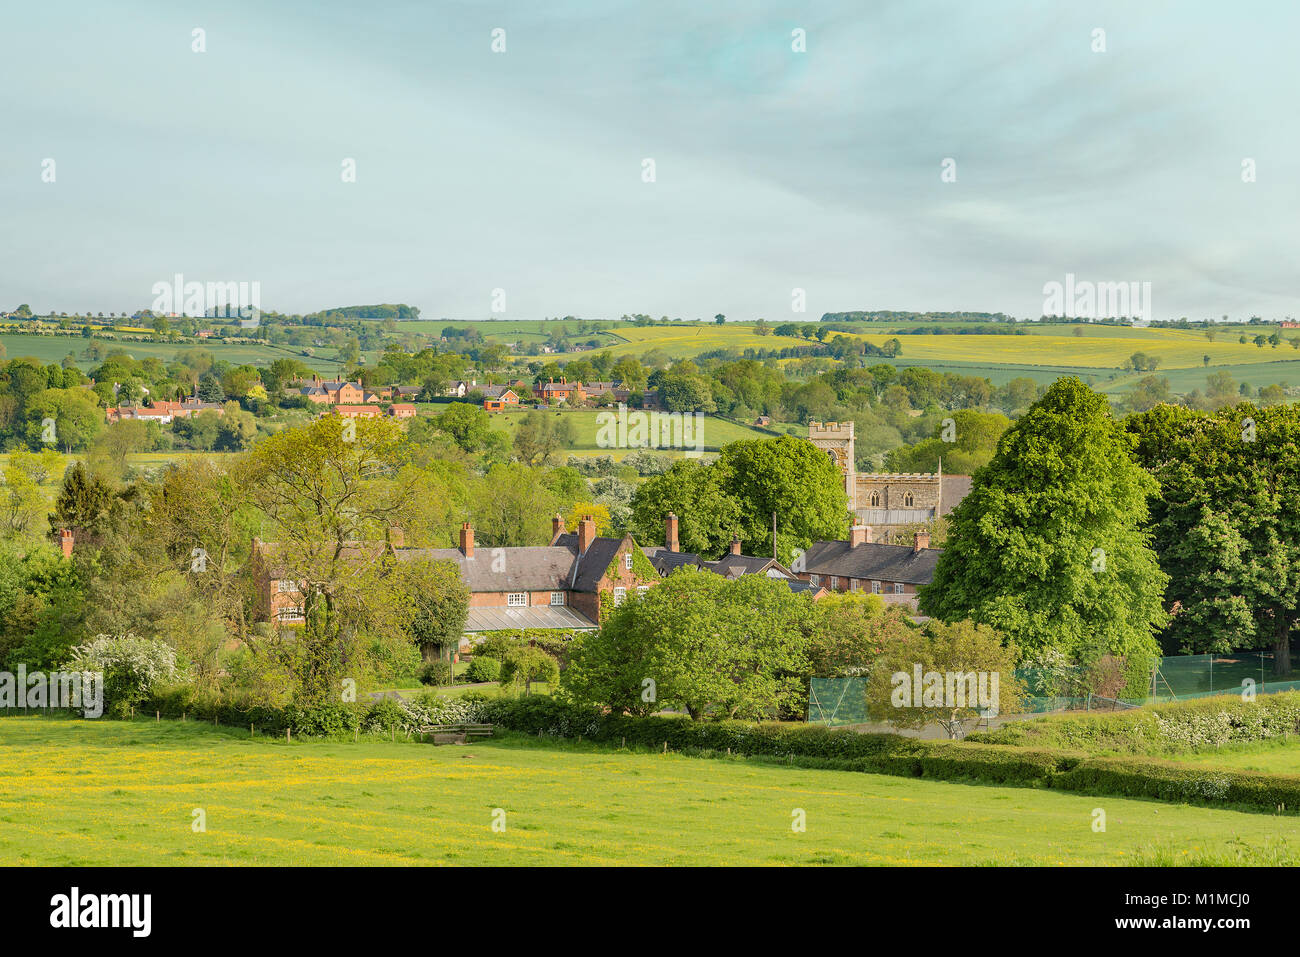 An image showing a section of the small peaceful village of Rotherby, Leicestershire, England, UK. Stock Photo